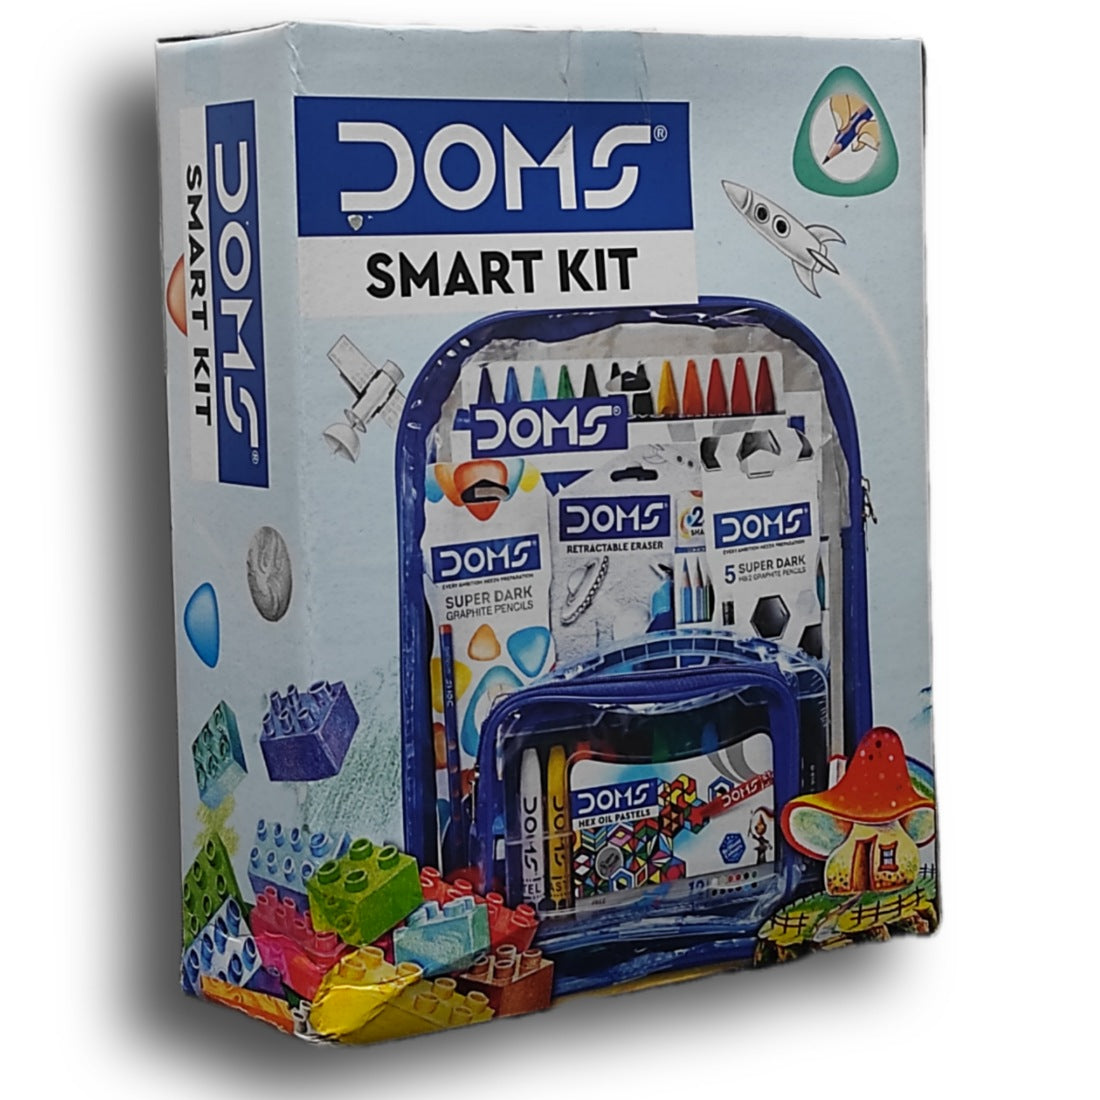 DOMS SMART KIT WITH 12 EXITED UNIQUE STATIONERY ITEMS -  SMART DRAWING KIT